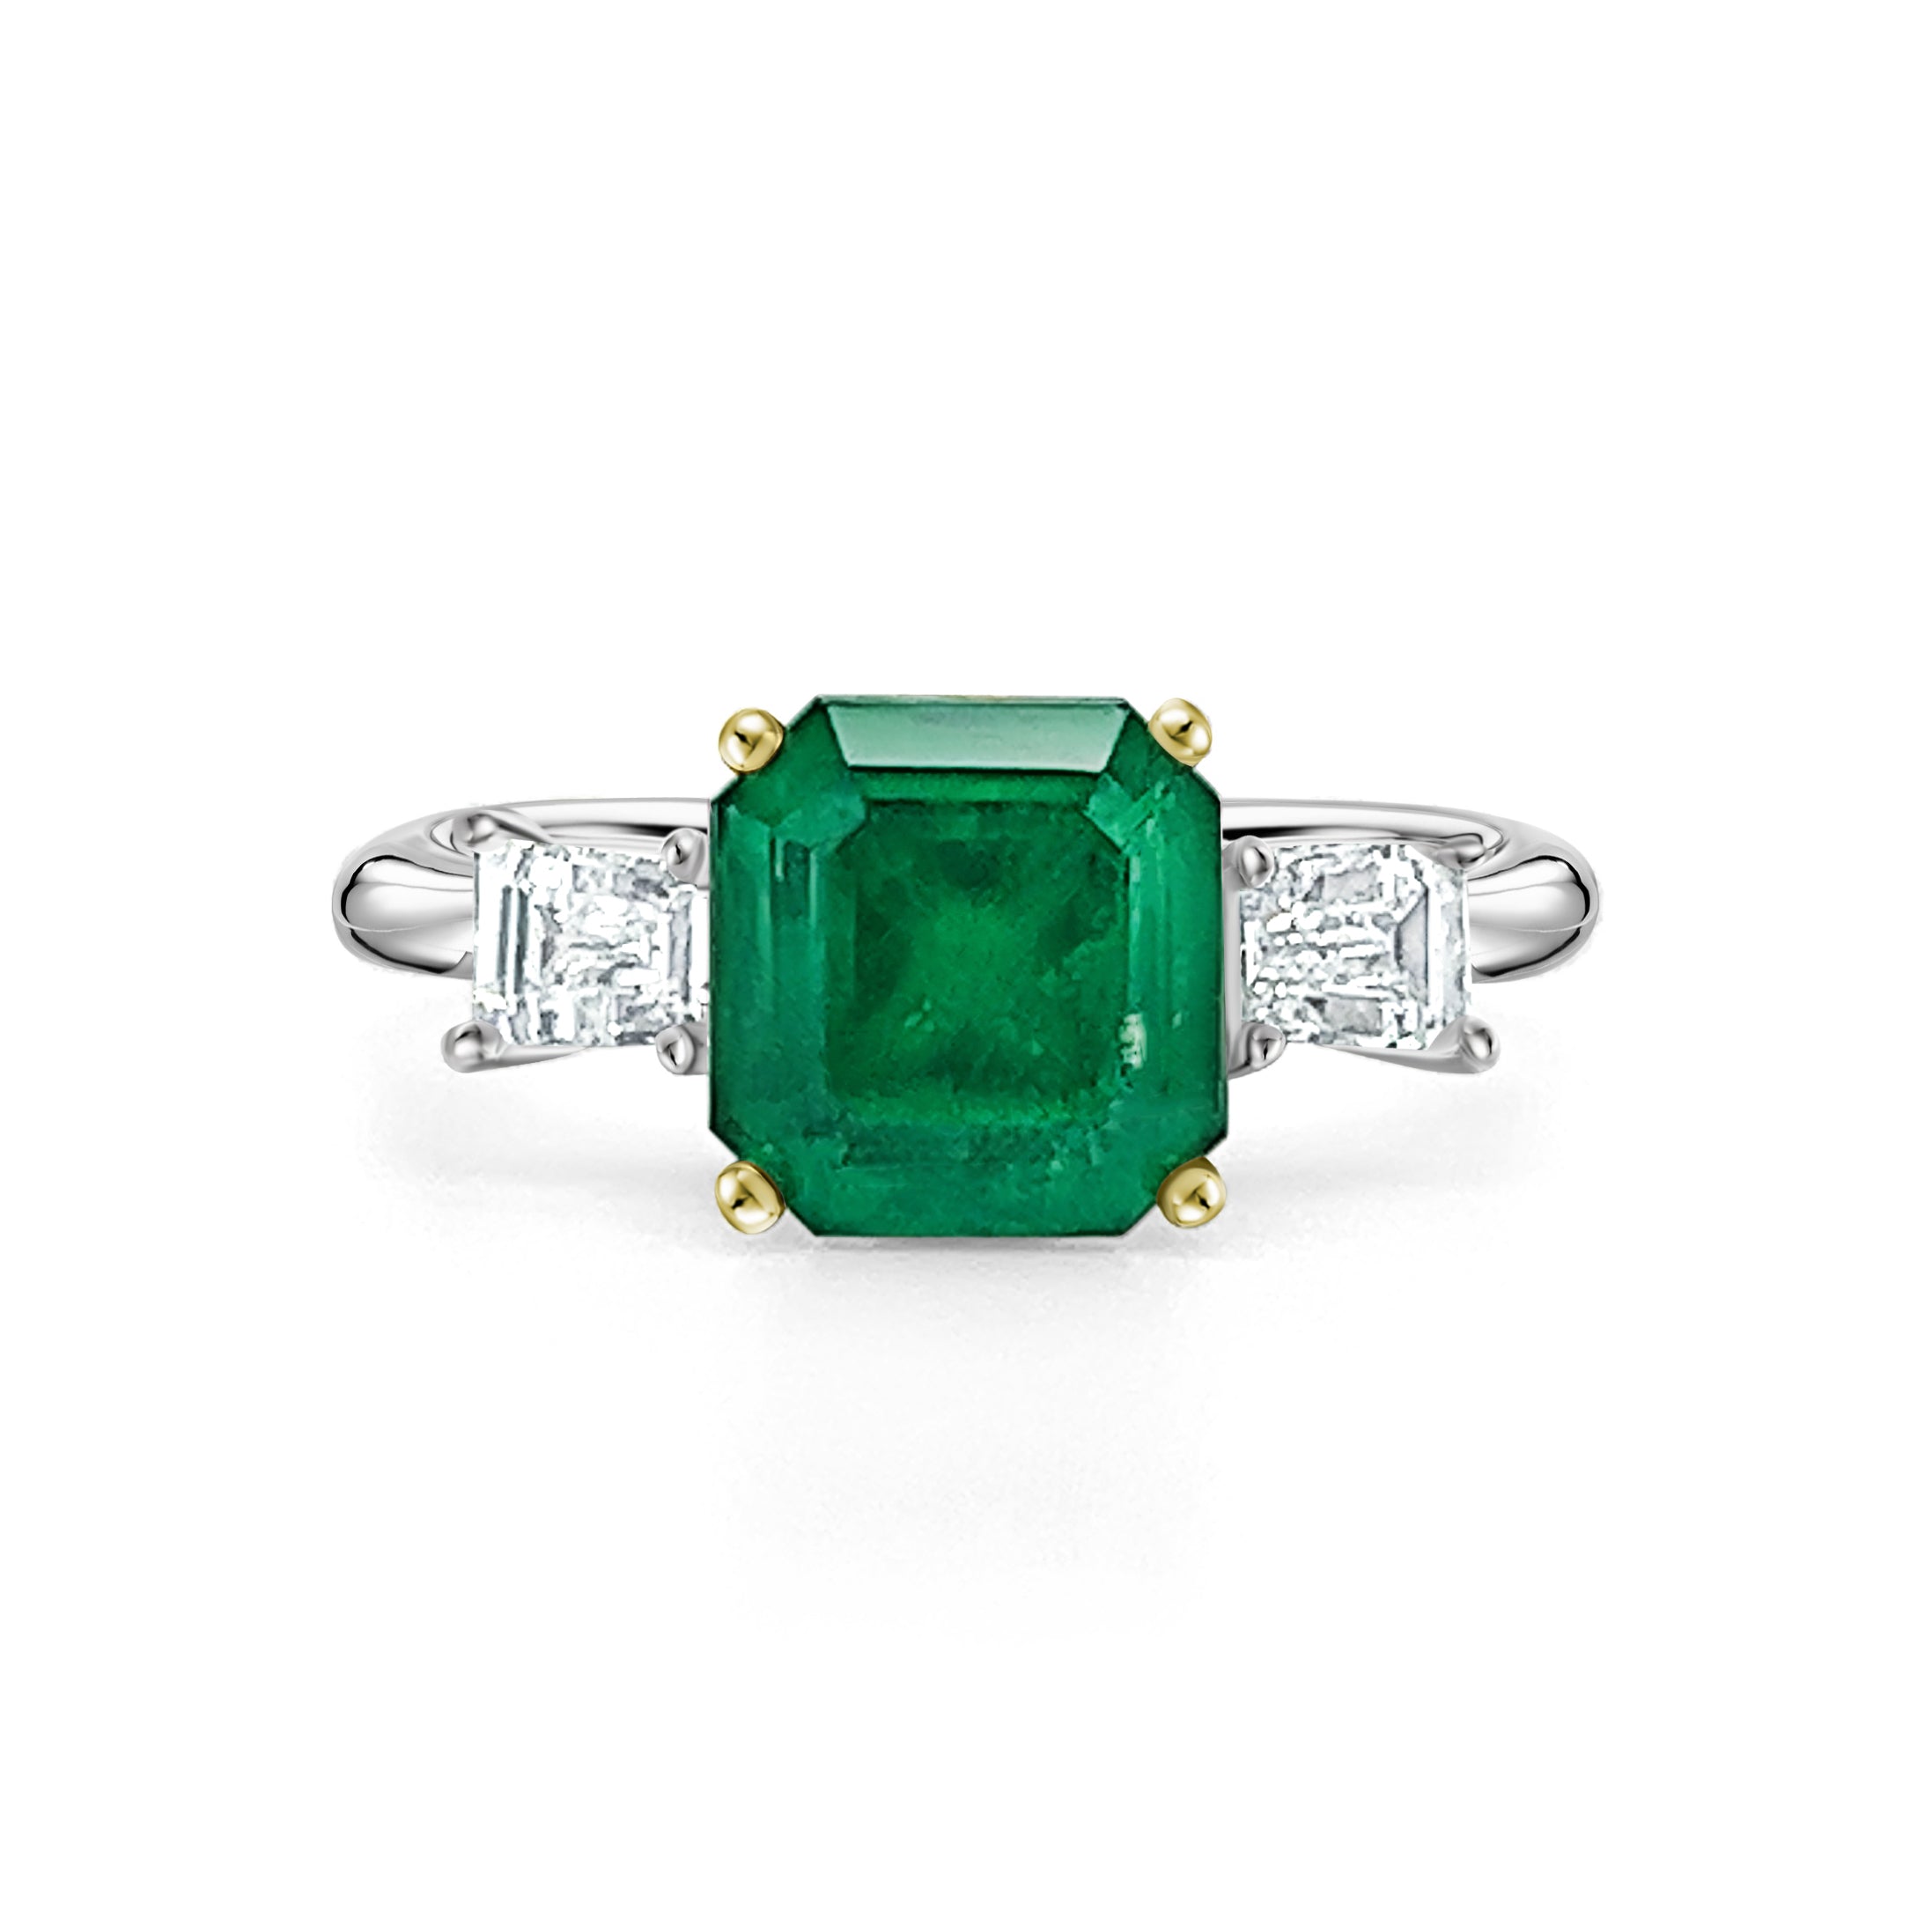 2_19-Carat-Natural-Emerald-3-Stone-Ring-with-Baguette-Diamond-in-18K-White-Gold-Rings.jpg